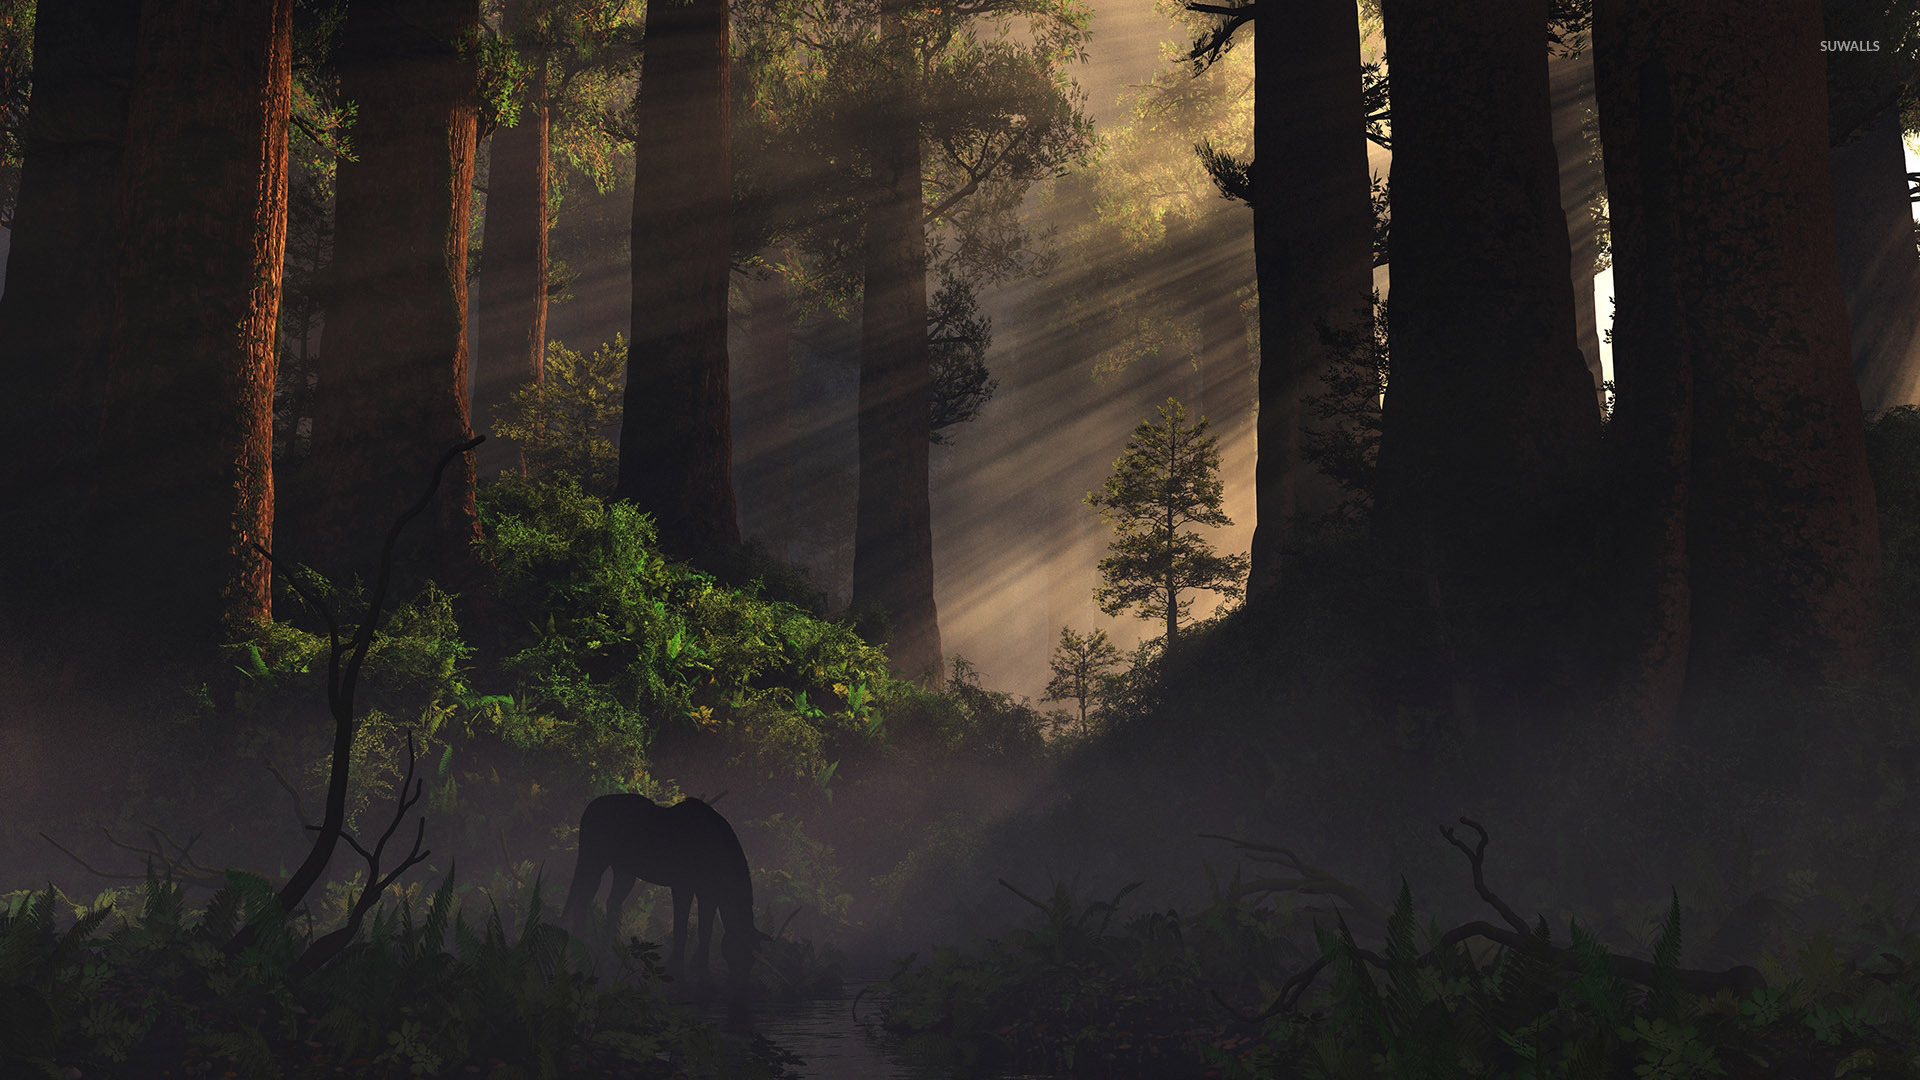 horse-in-the-forest-34606-1920x1080.jpg